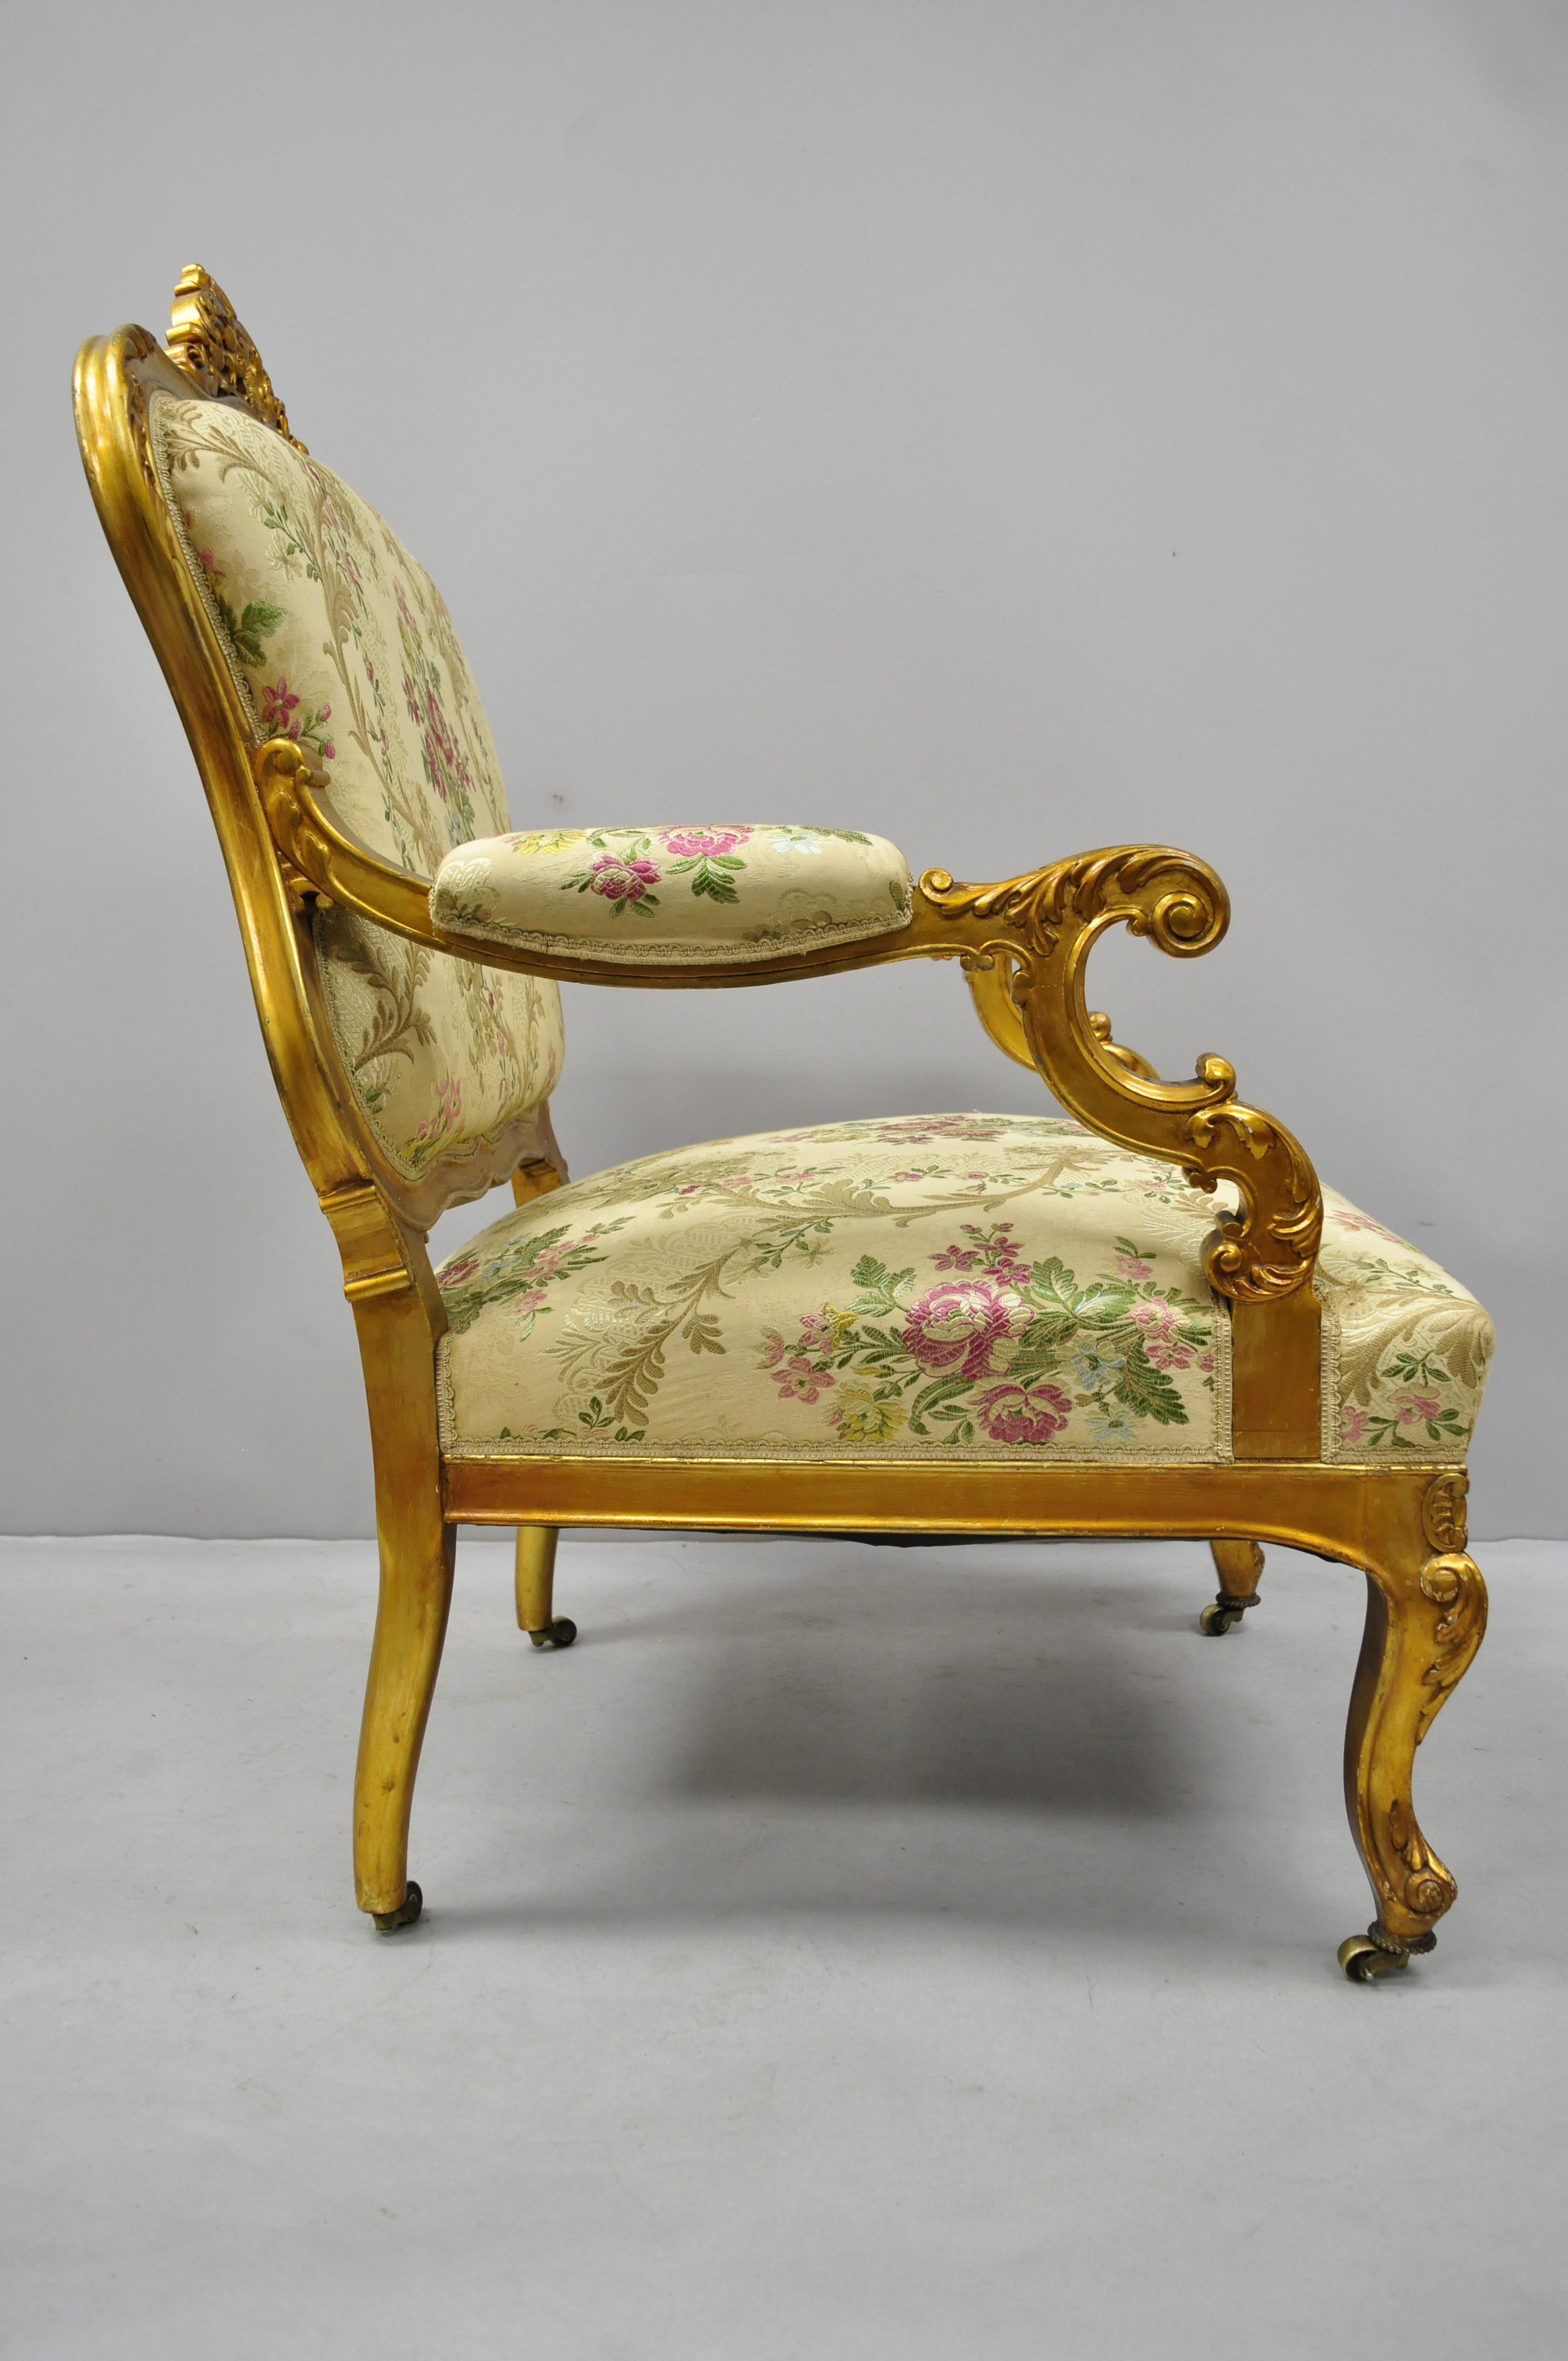 1920s French Louis XV Rococo Style Gold Gilt Parlor Chair Armchair 3